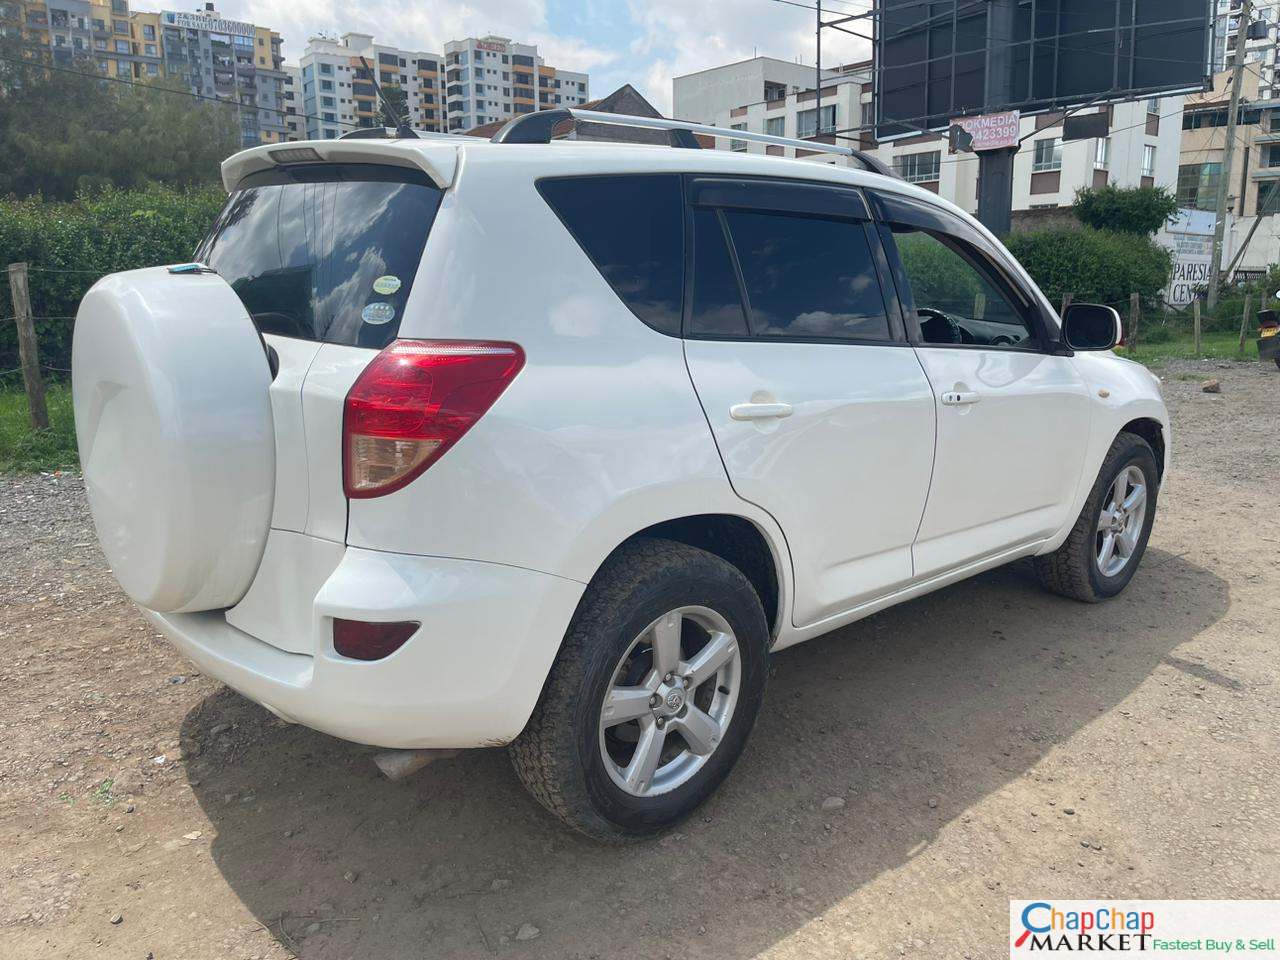 Toyota RAV4 Asian Owner You Pay 30% Deposit Trade in OK EXCLUSIVE RAV4 for sale in Kenya hire purchase installments